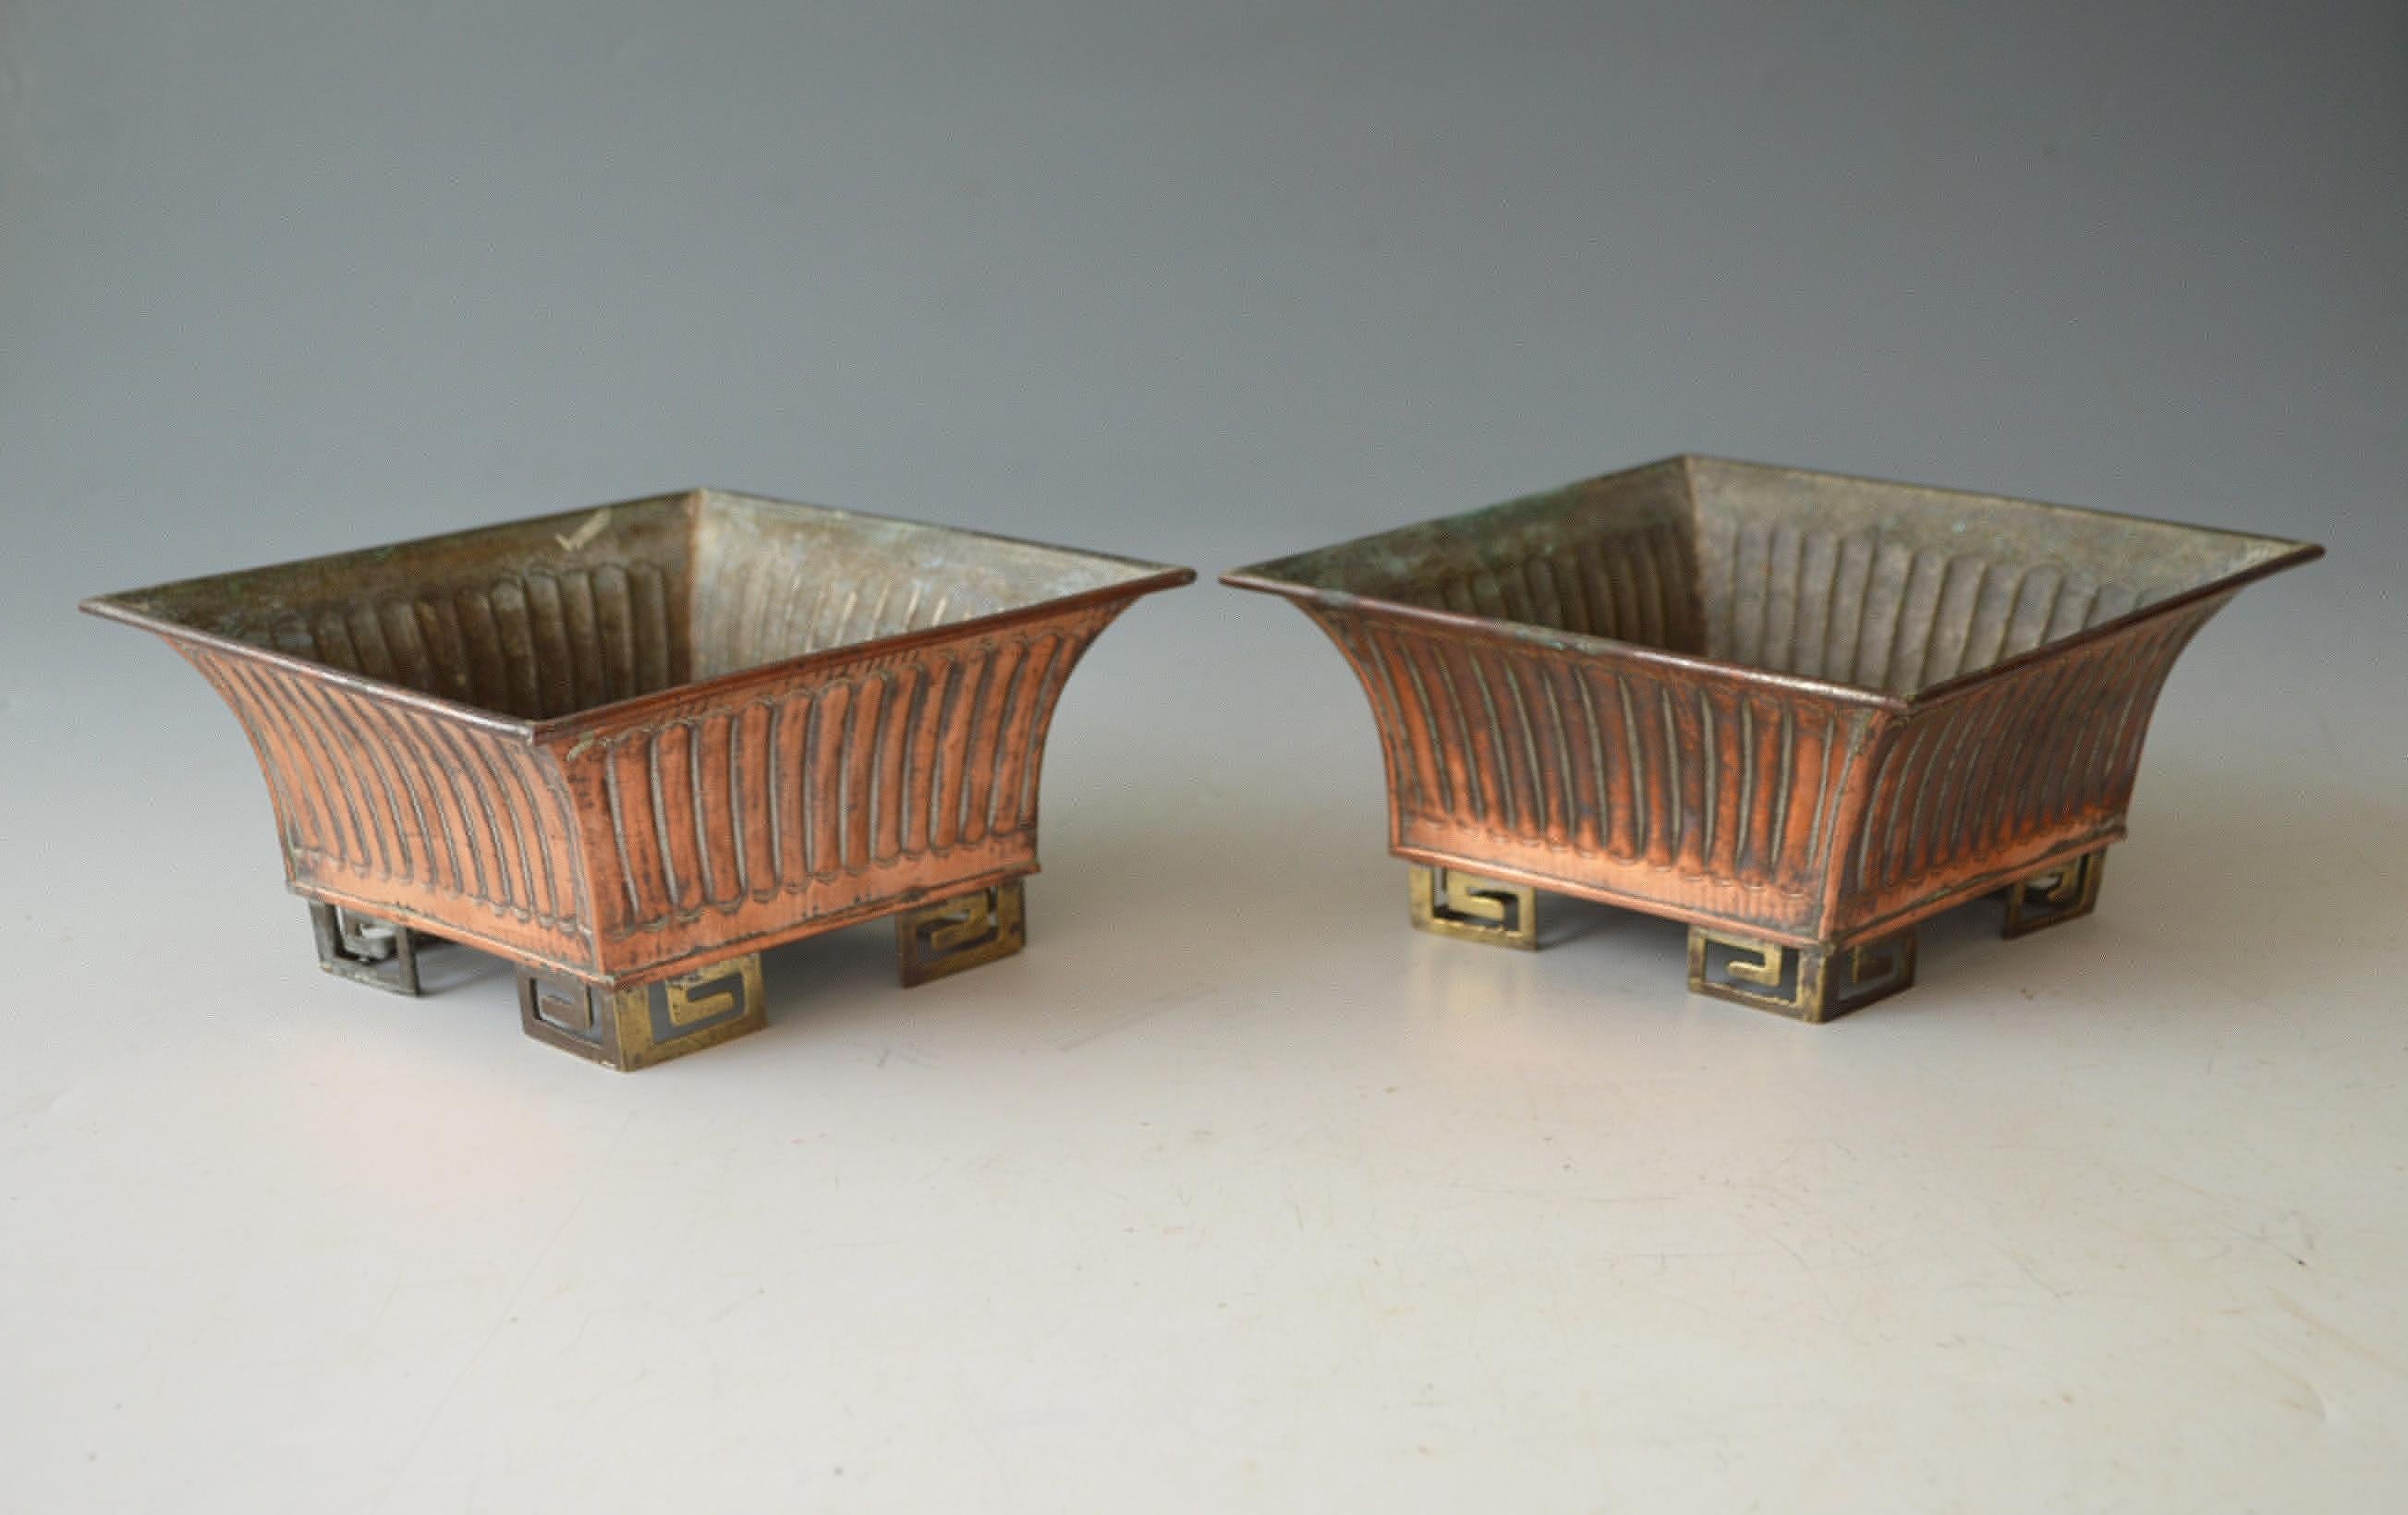 A fine elegant pair of Chinese copper planter sand planters in the arts and crafts style 
Diamond shaped ribbed upper with brass geometric base
Period early mid 20 th century.
Size 25 x 19 x 9 cm.
Nice things
 